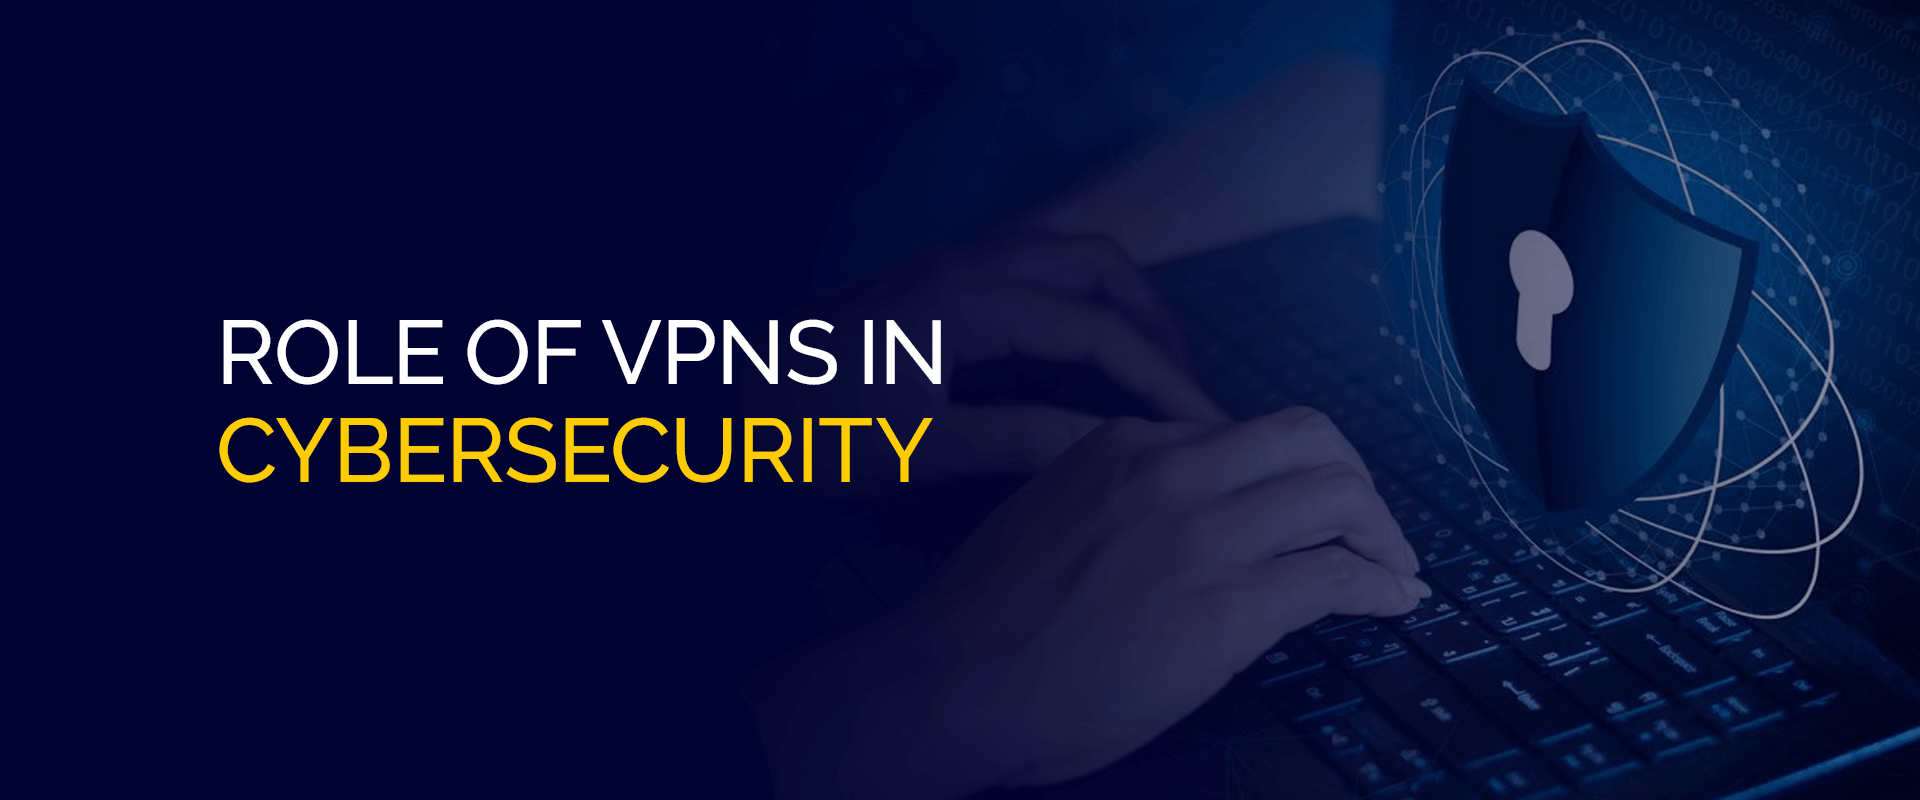 Role of VPNs in Cybersecurity